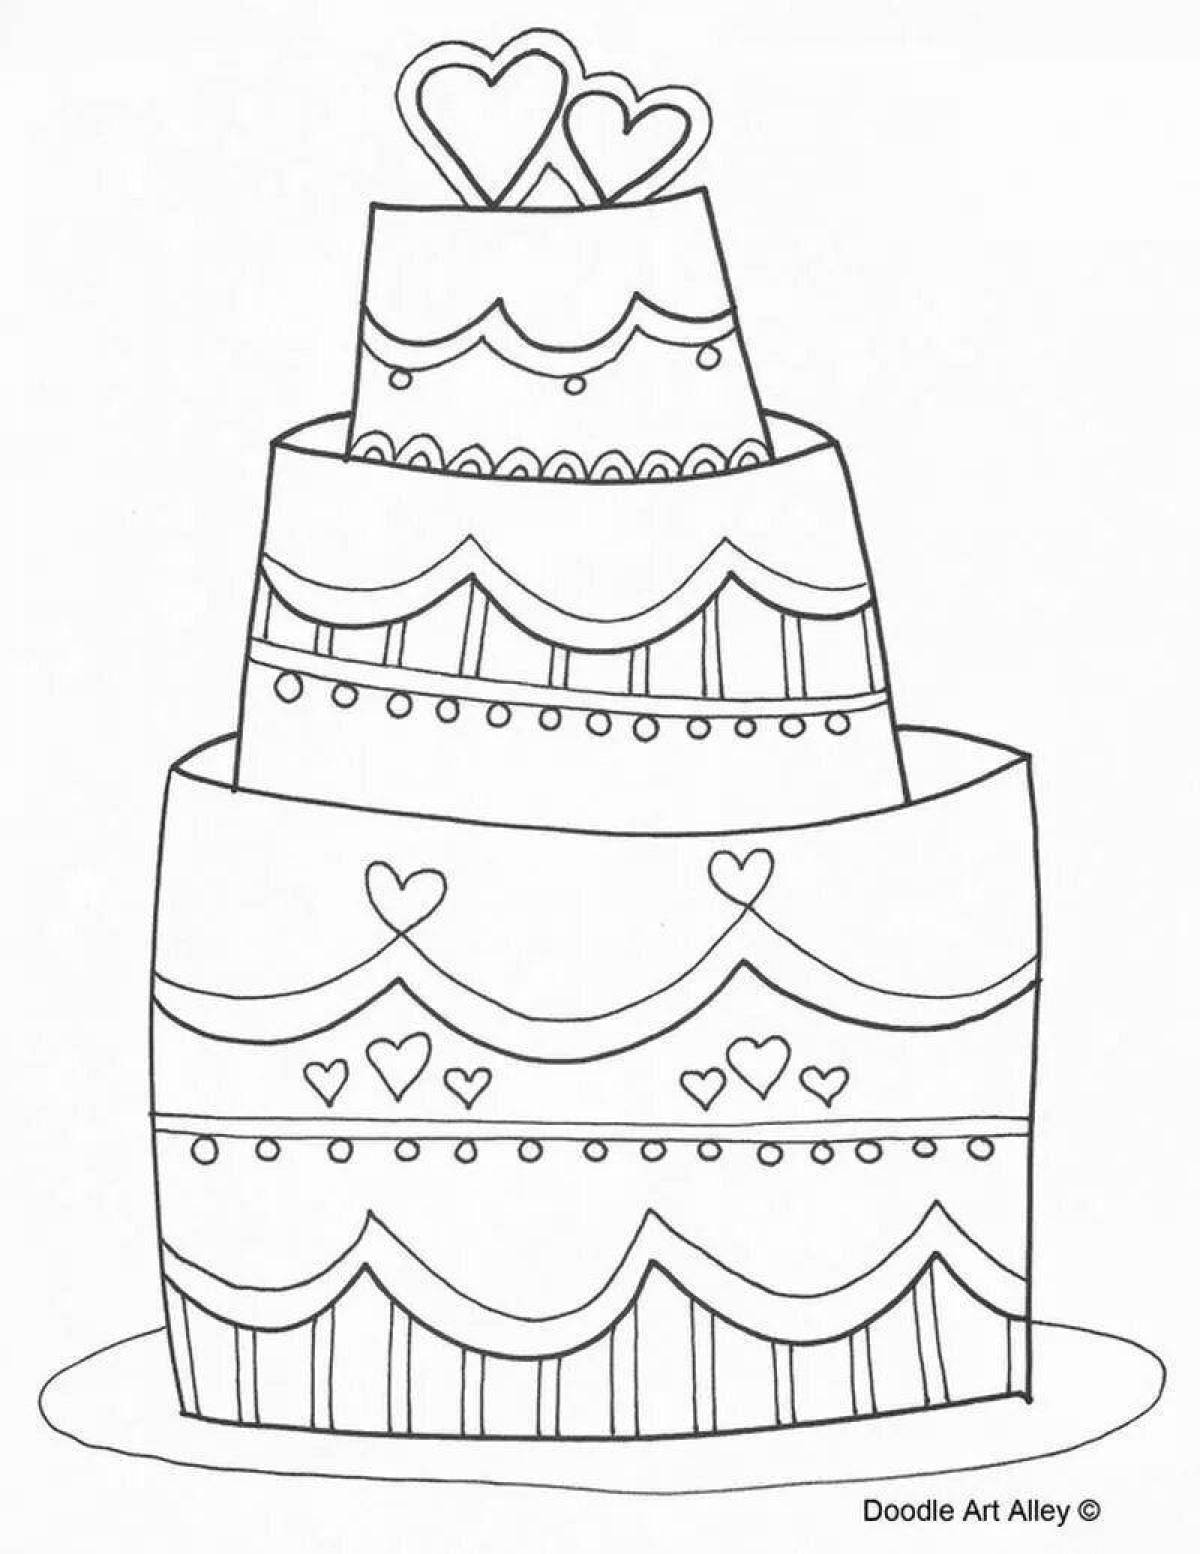 Sky beautiful cake coloring page